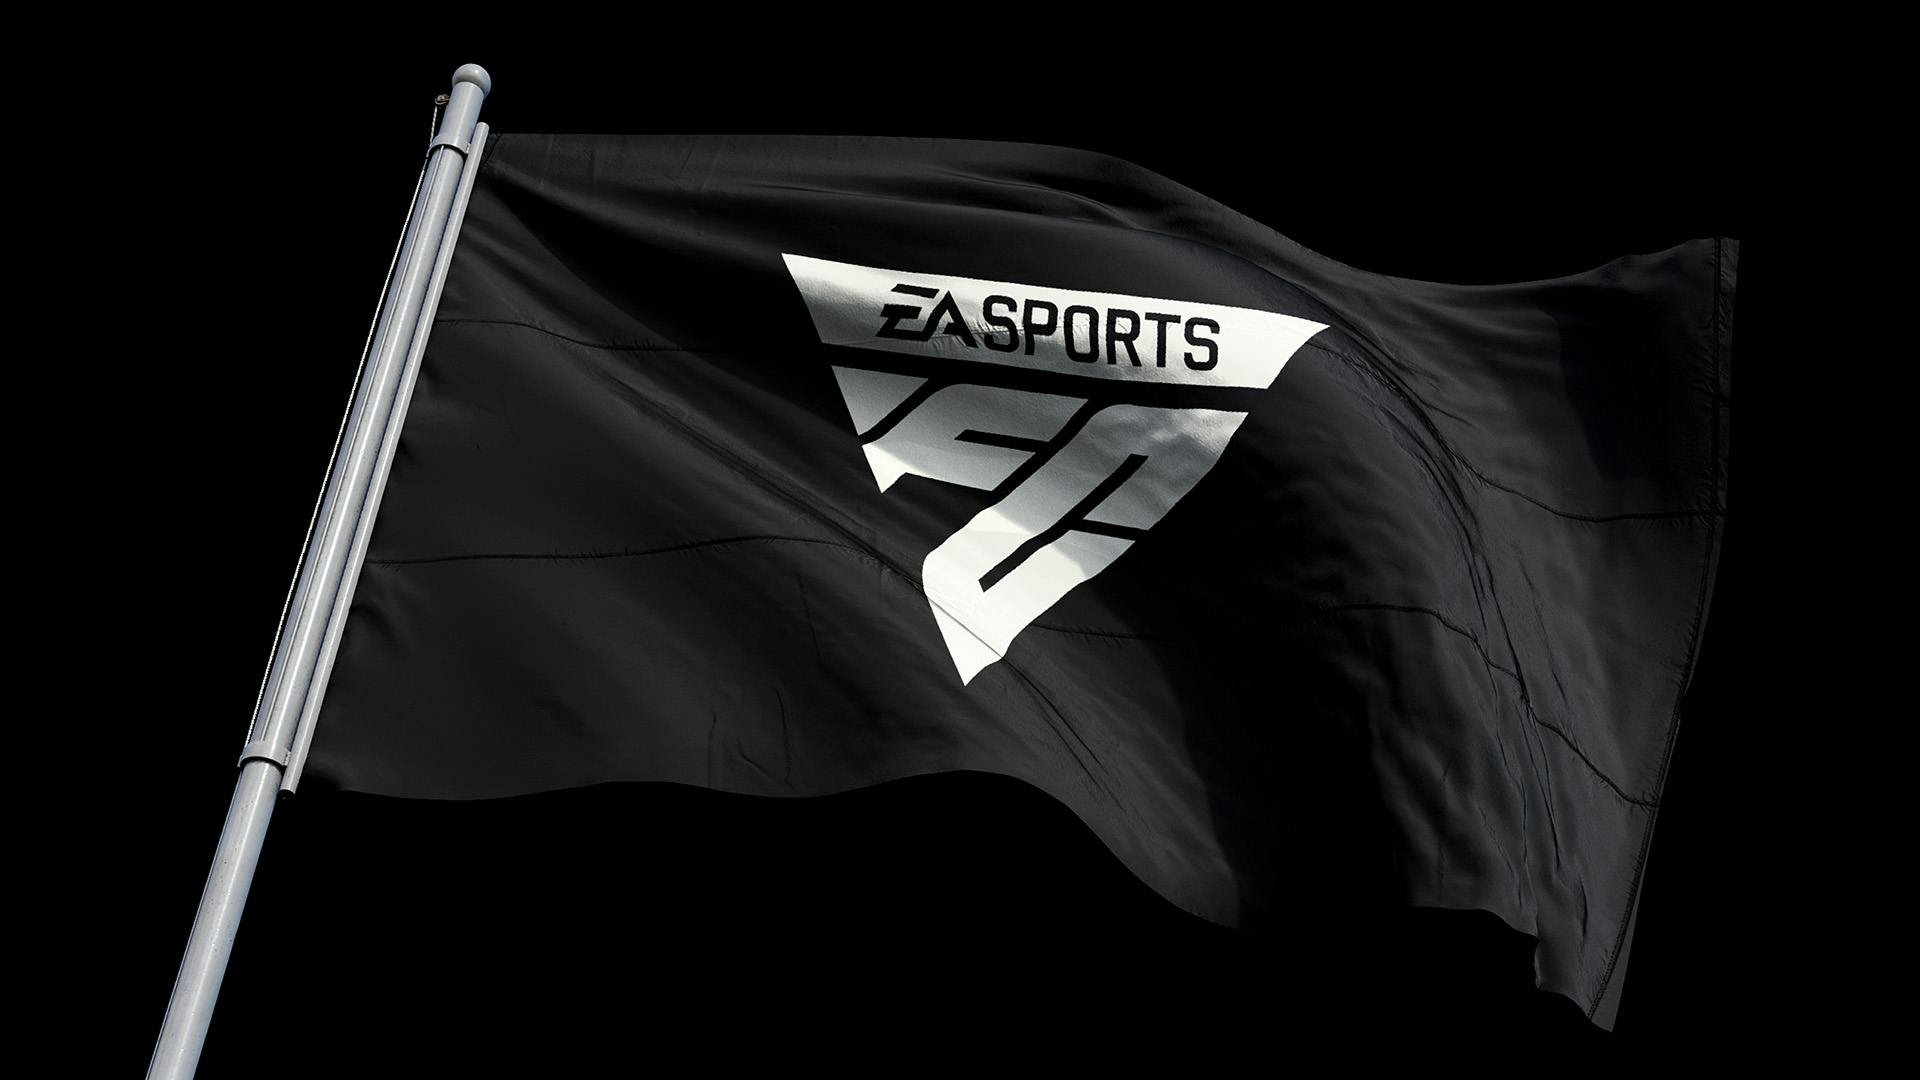 Image showing the EA Sports FC logo on a black flag